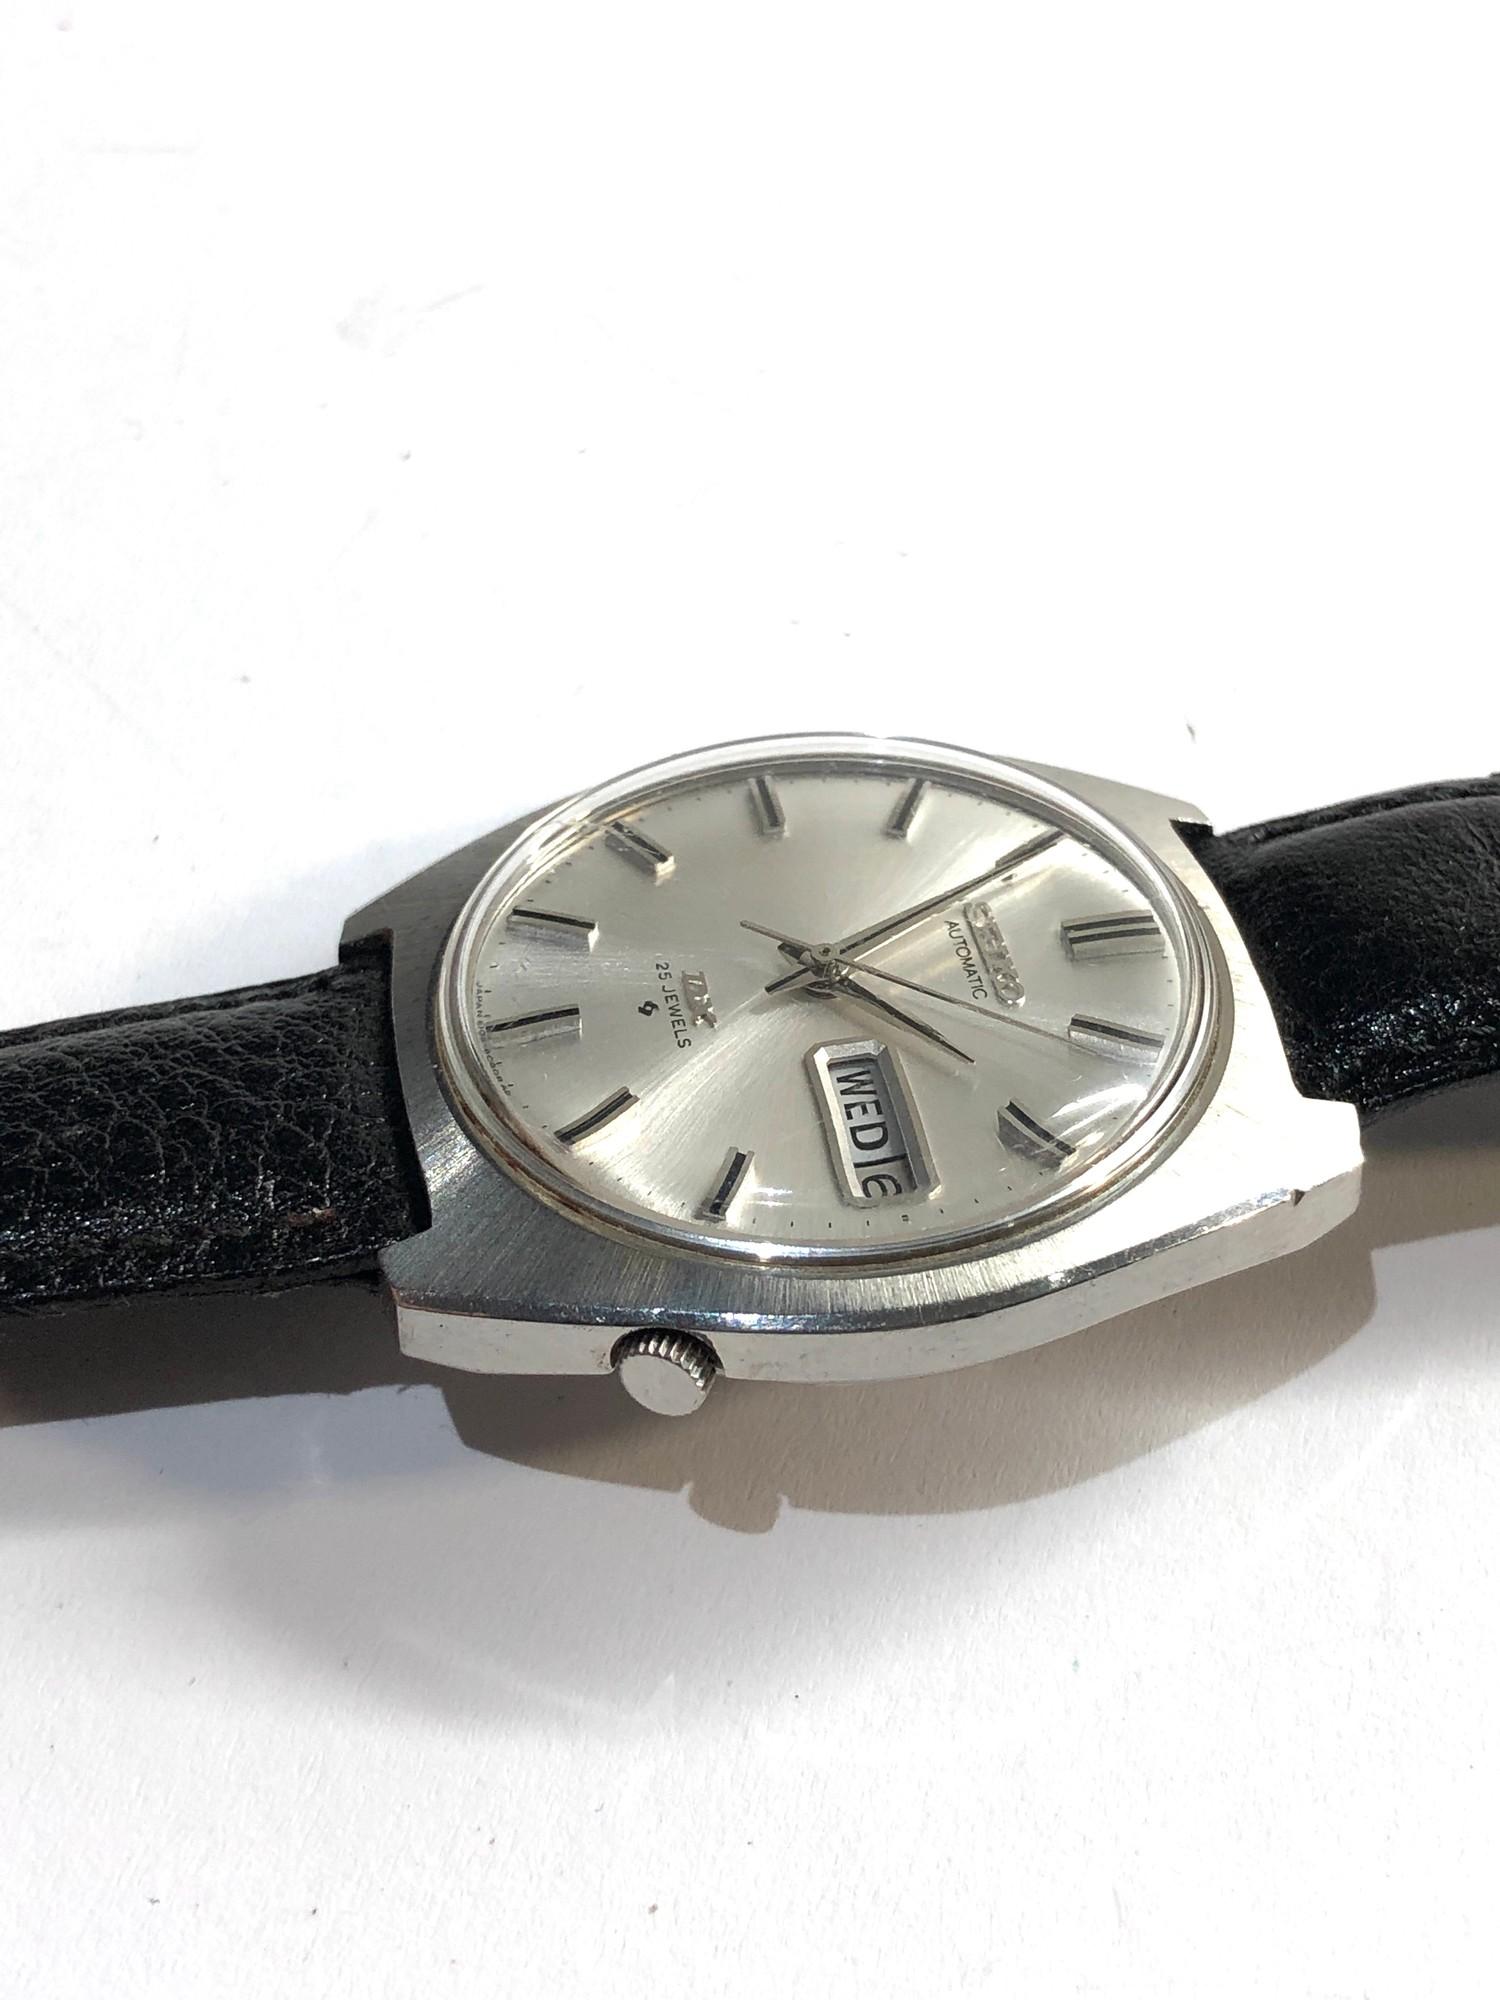 Vintage Seiko DX automatic 6106-8080 day date 25 jewel gents wristwatch in good overall condition in - Image 2 of 4